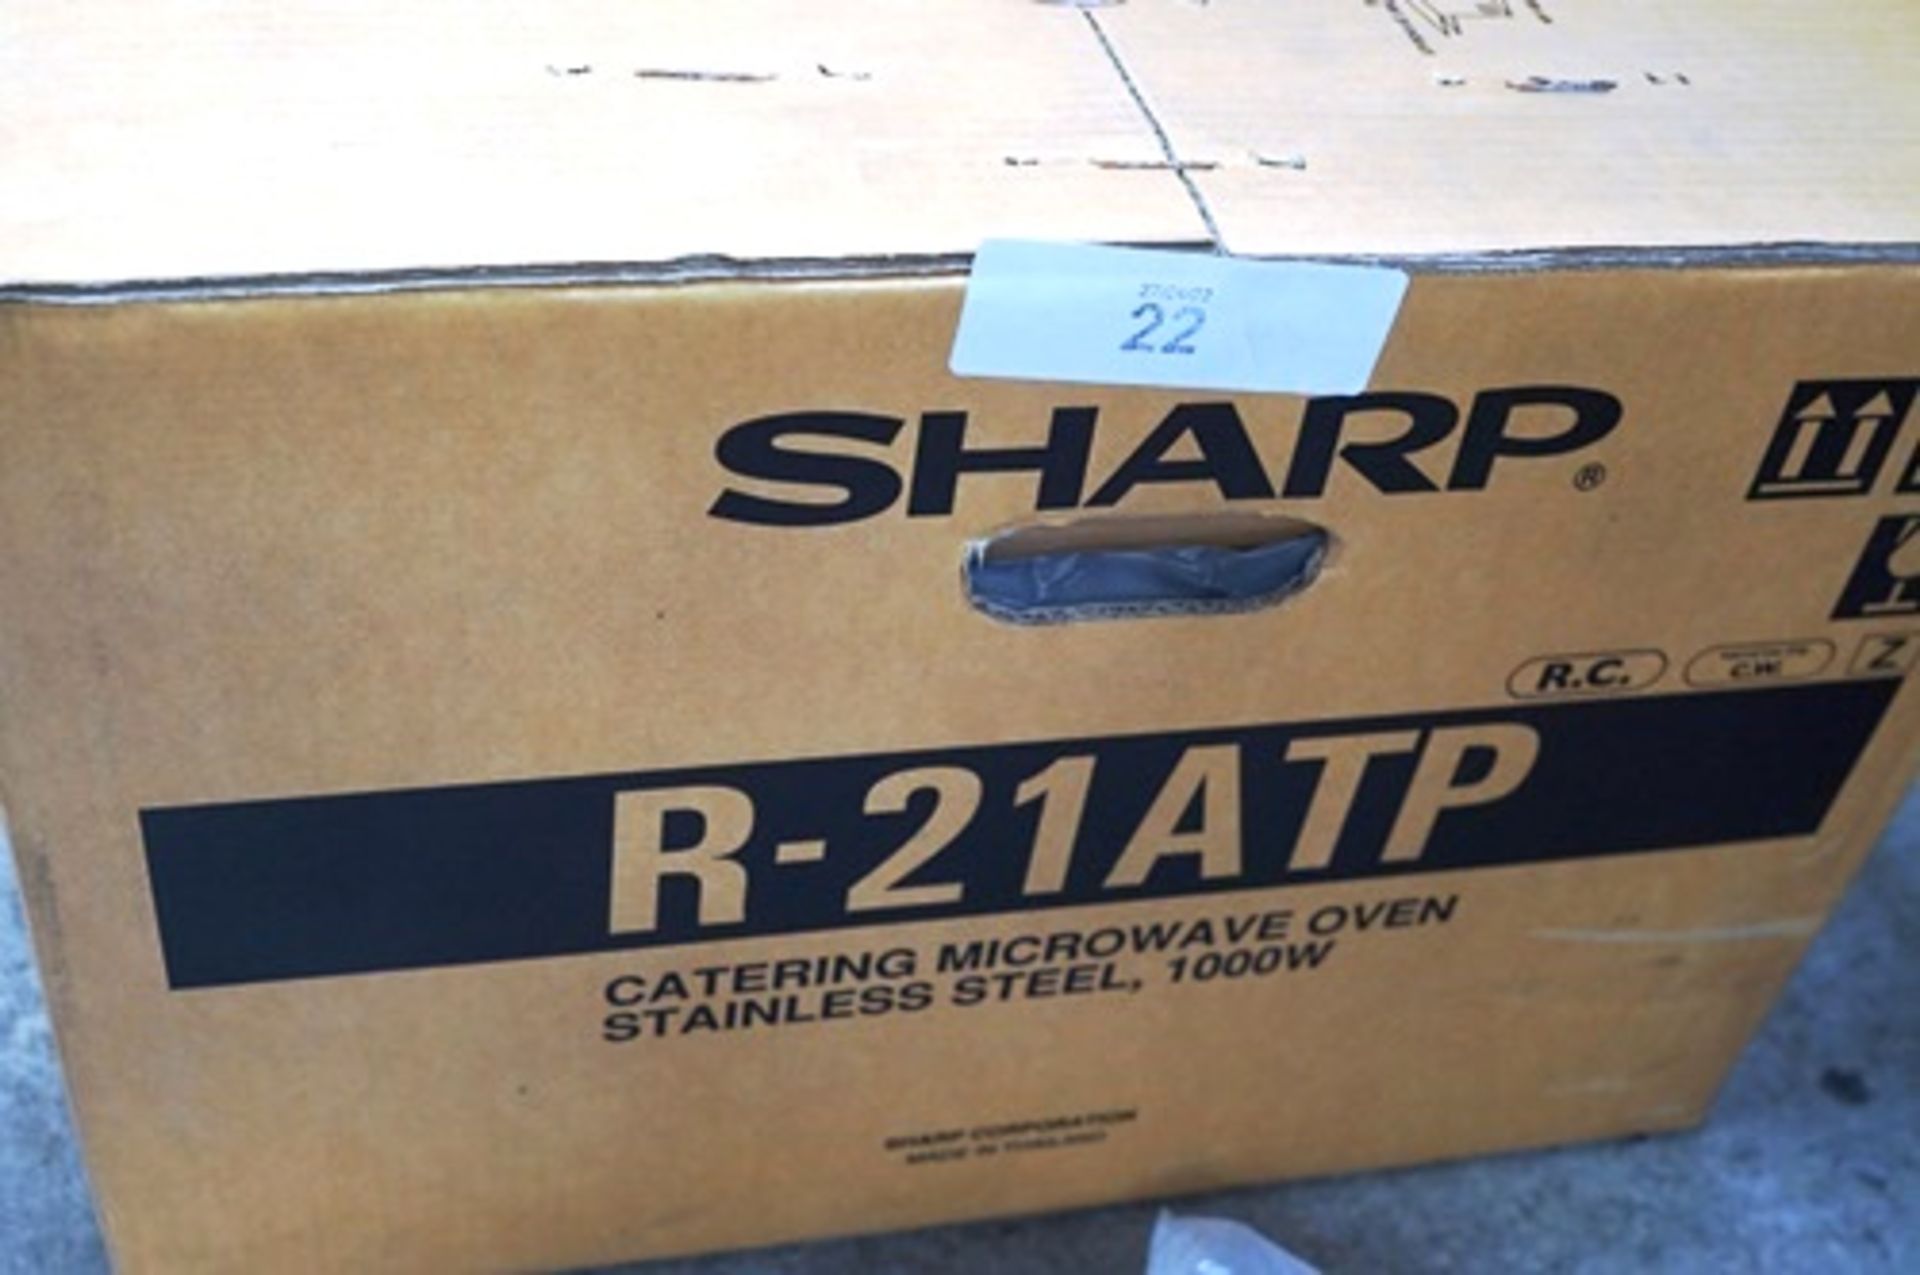 1 x Sharp R-21ATP 1000W commercial microwave, model MIC003R-21ATP - Sealed new in box (ES2) - Image 2 of 2